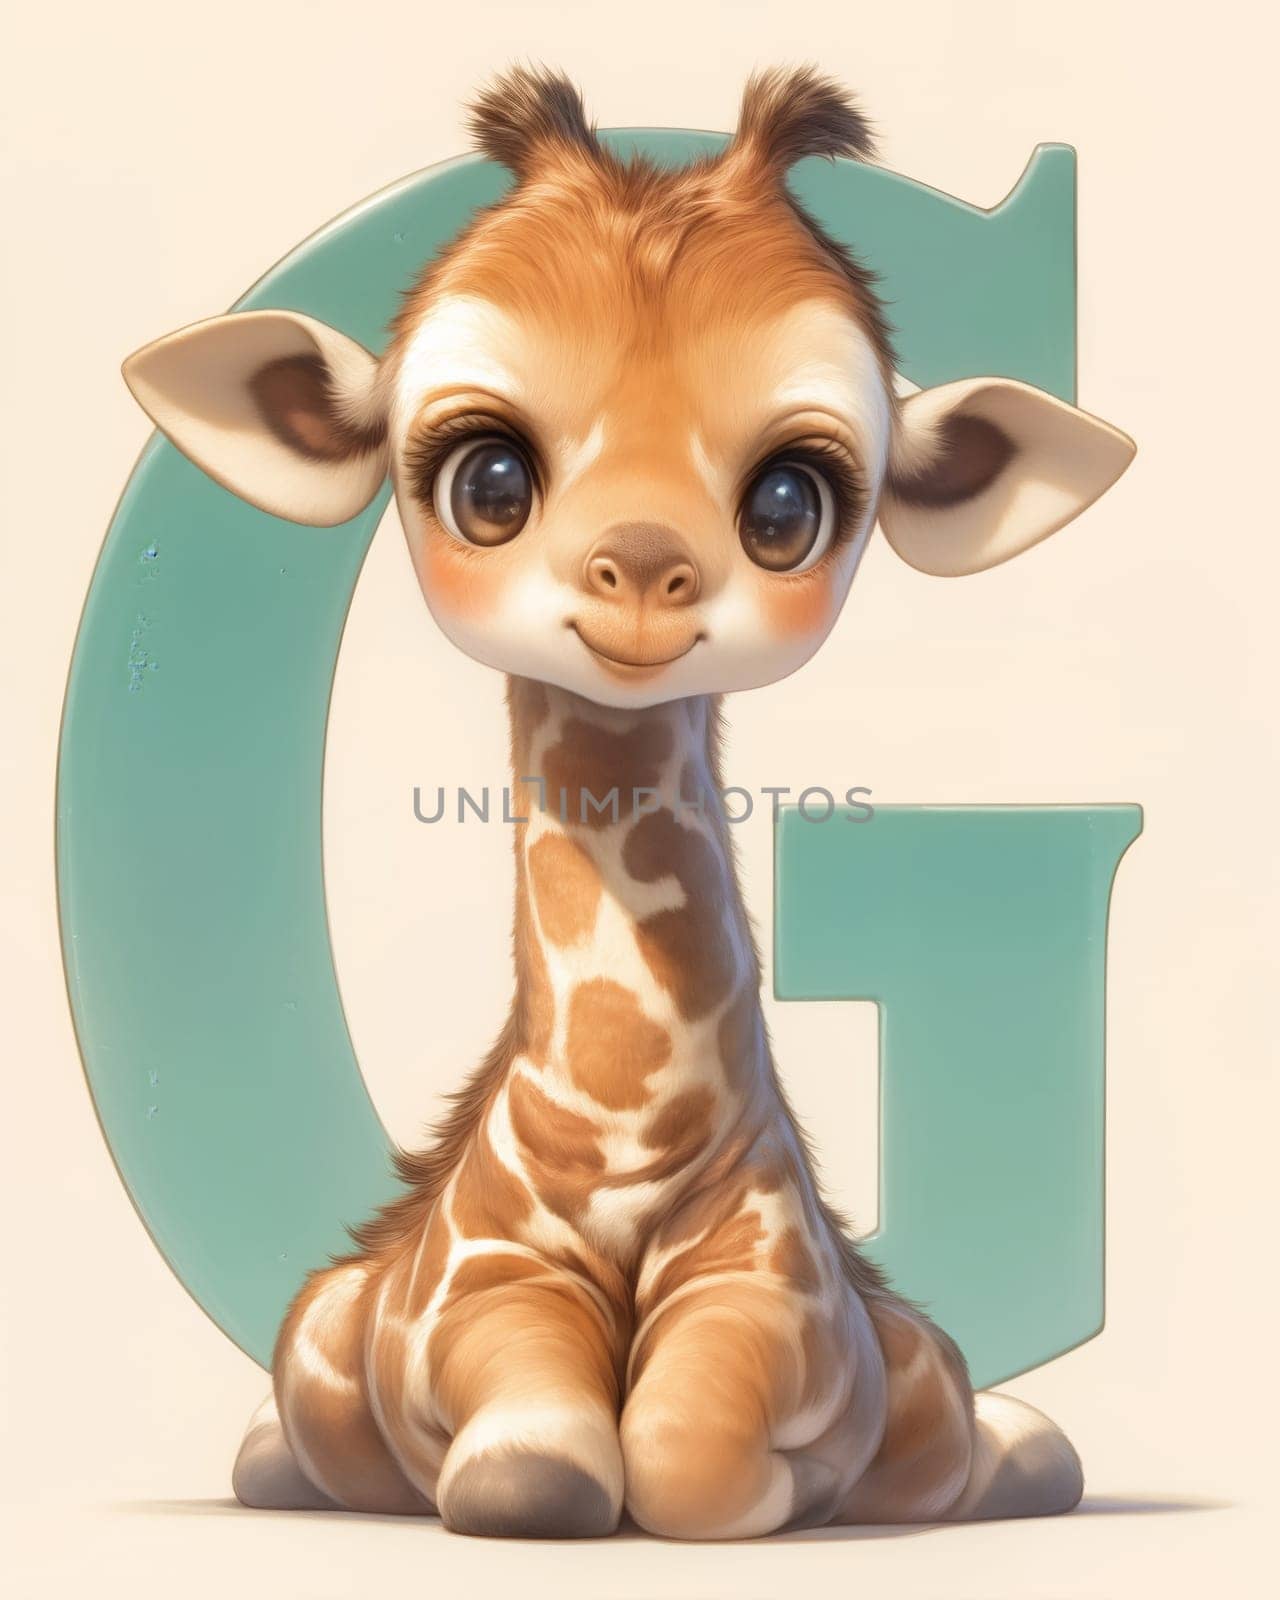 Illustration of a giraffe and the letter "U", learning the alphabet. by Fischeron